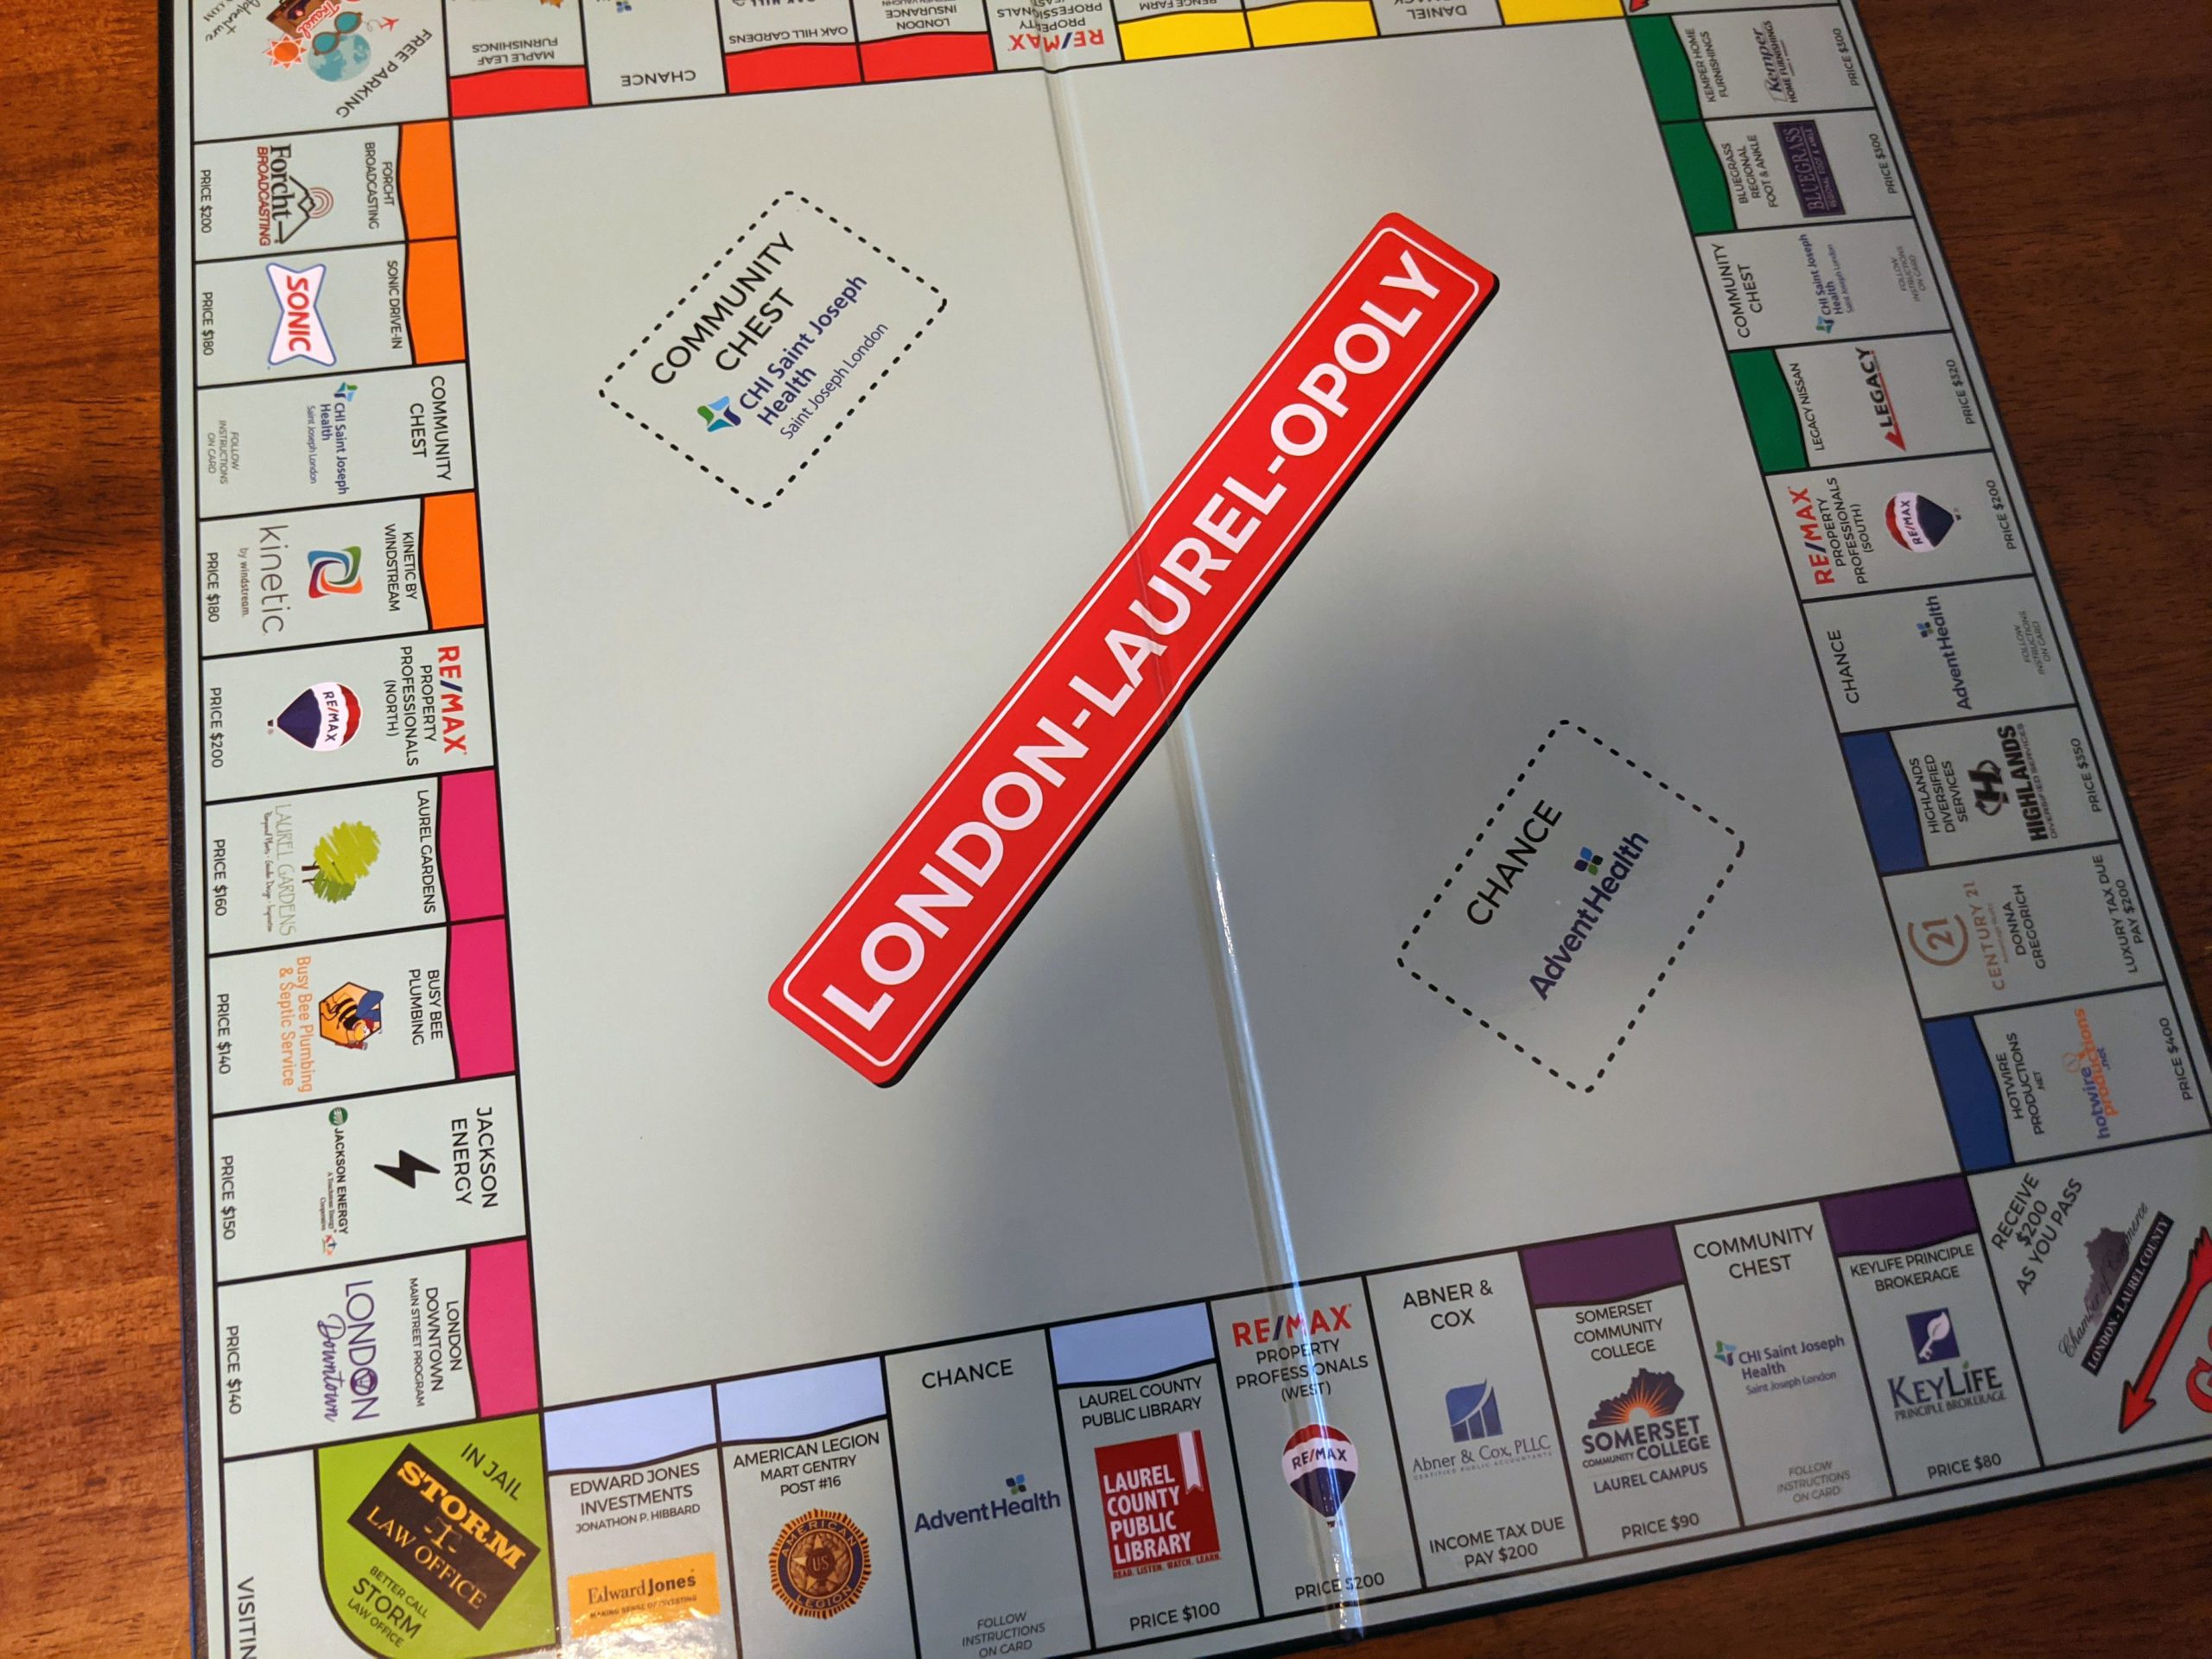 America-Opoly Monopoly Board Game